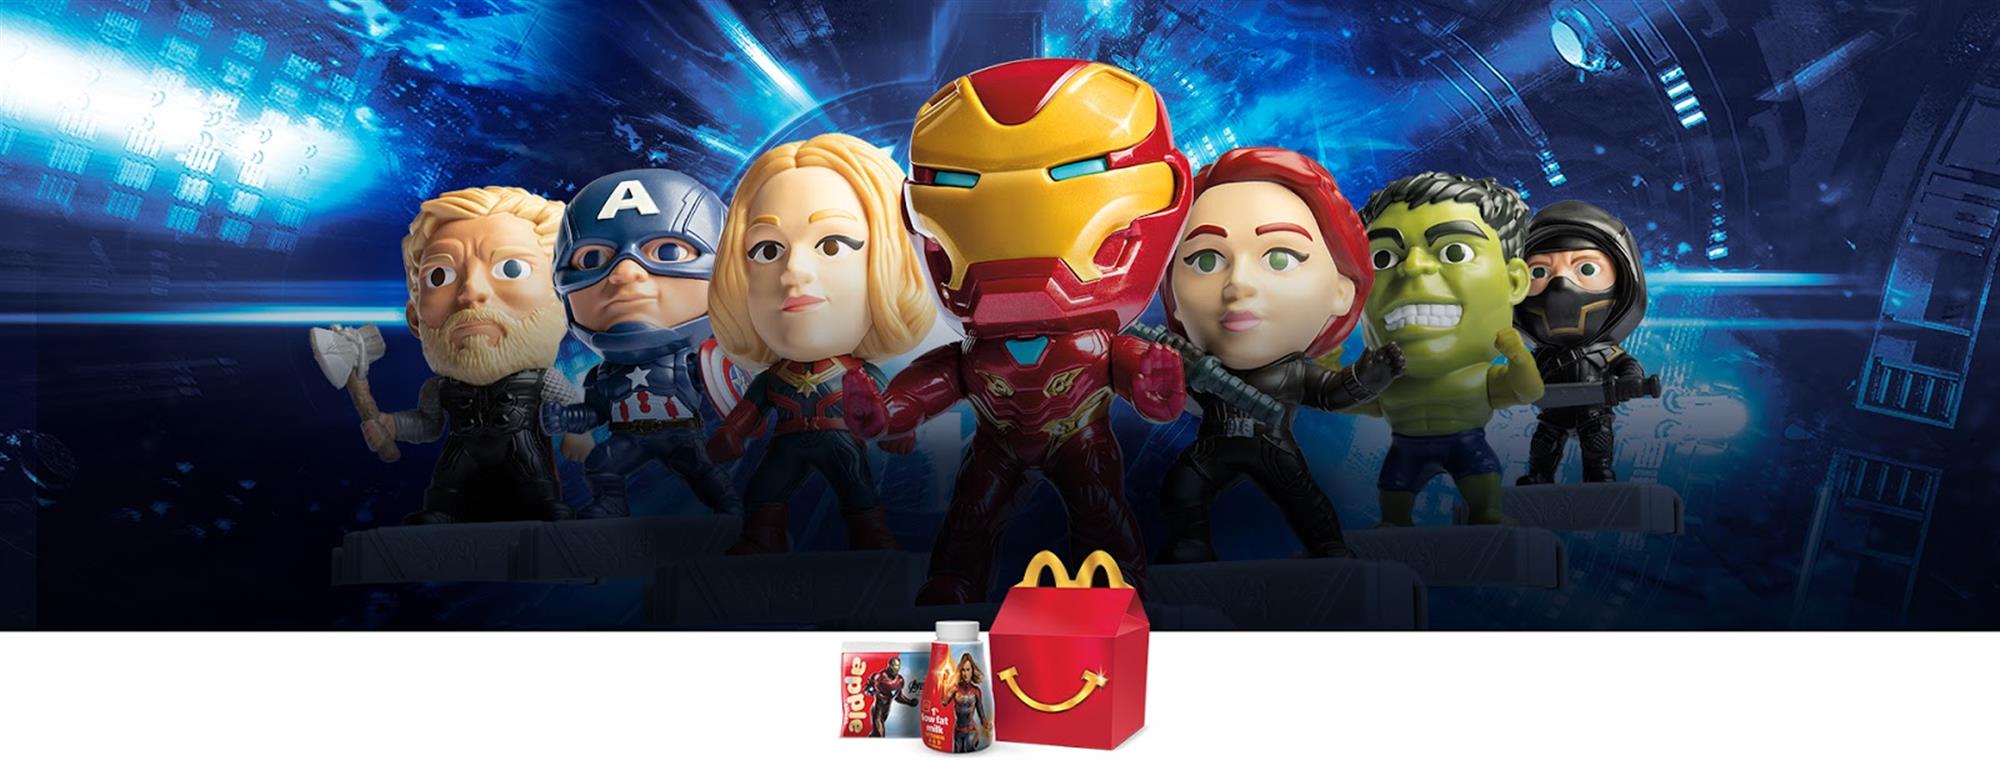 Choose Character Free ship 2019 Avengers End Game McDonalds Happy Meal toy 